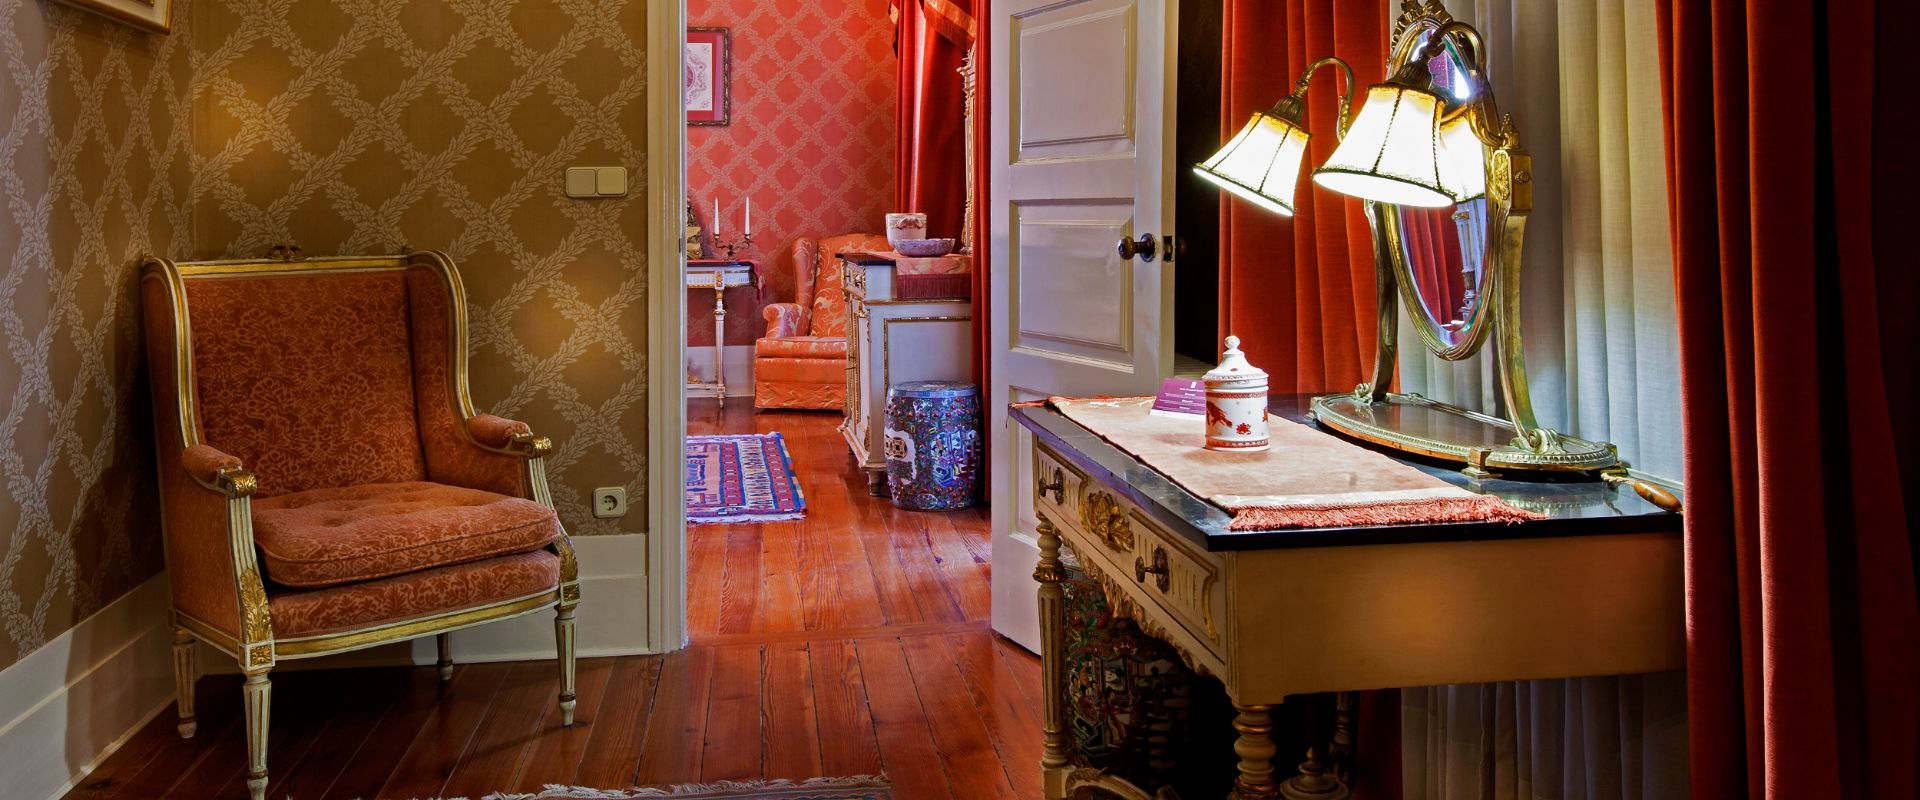 King suite  Palace Hotel Bussaco Coimbra